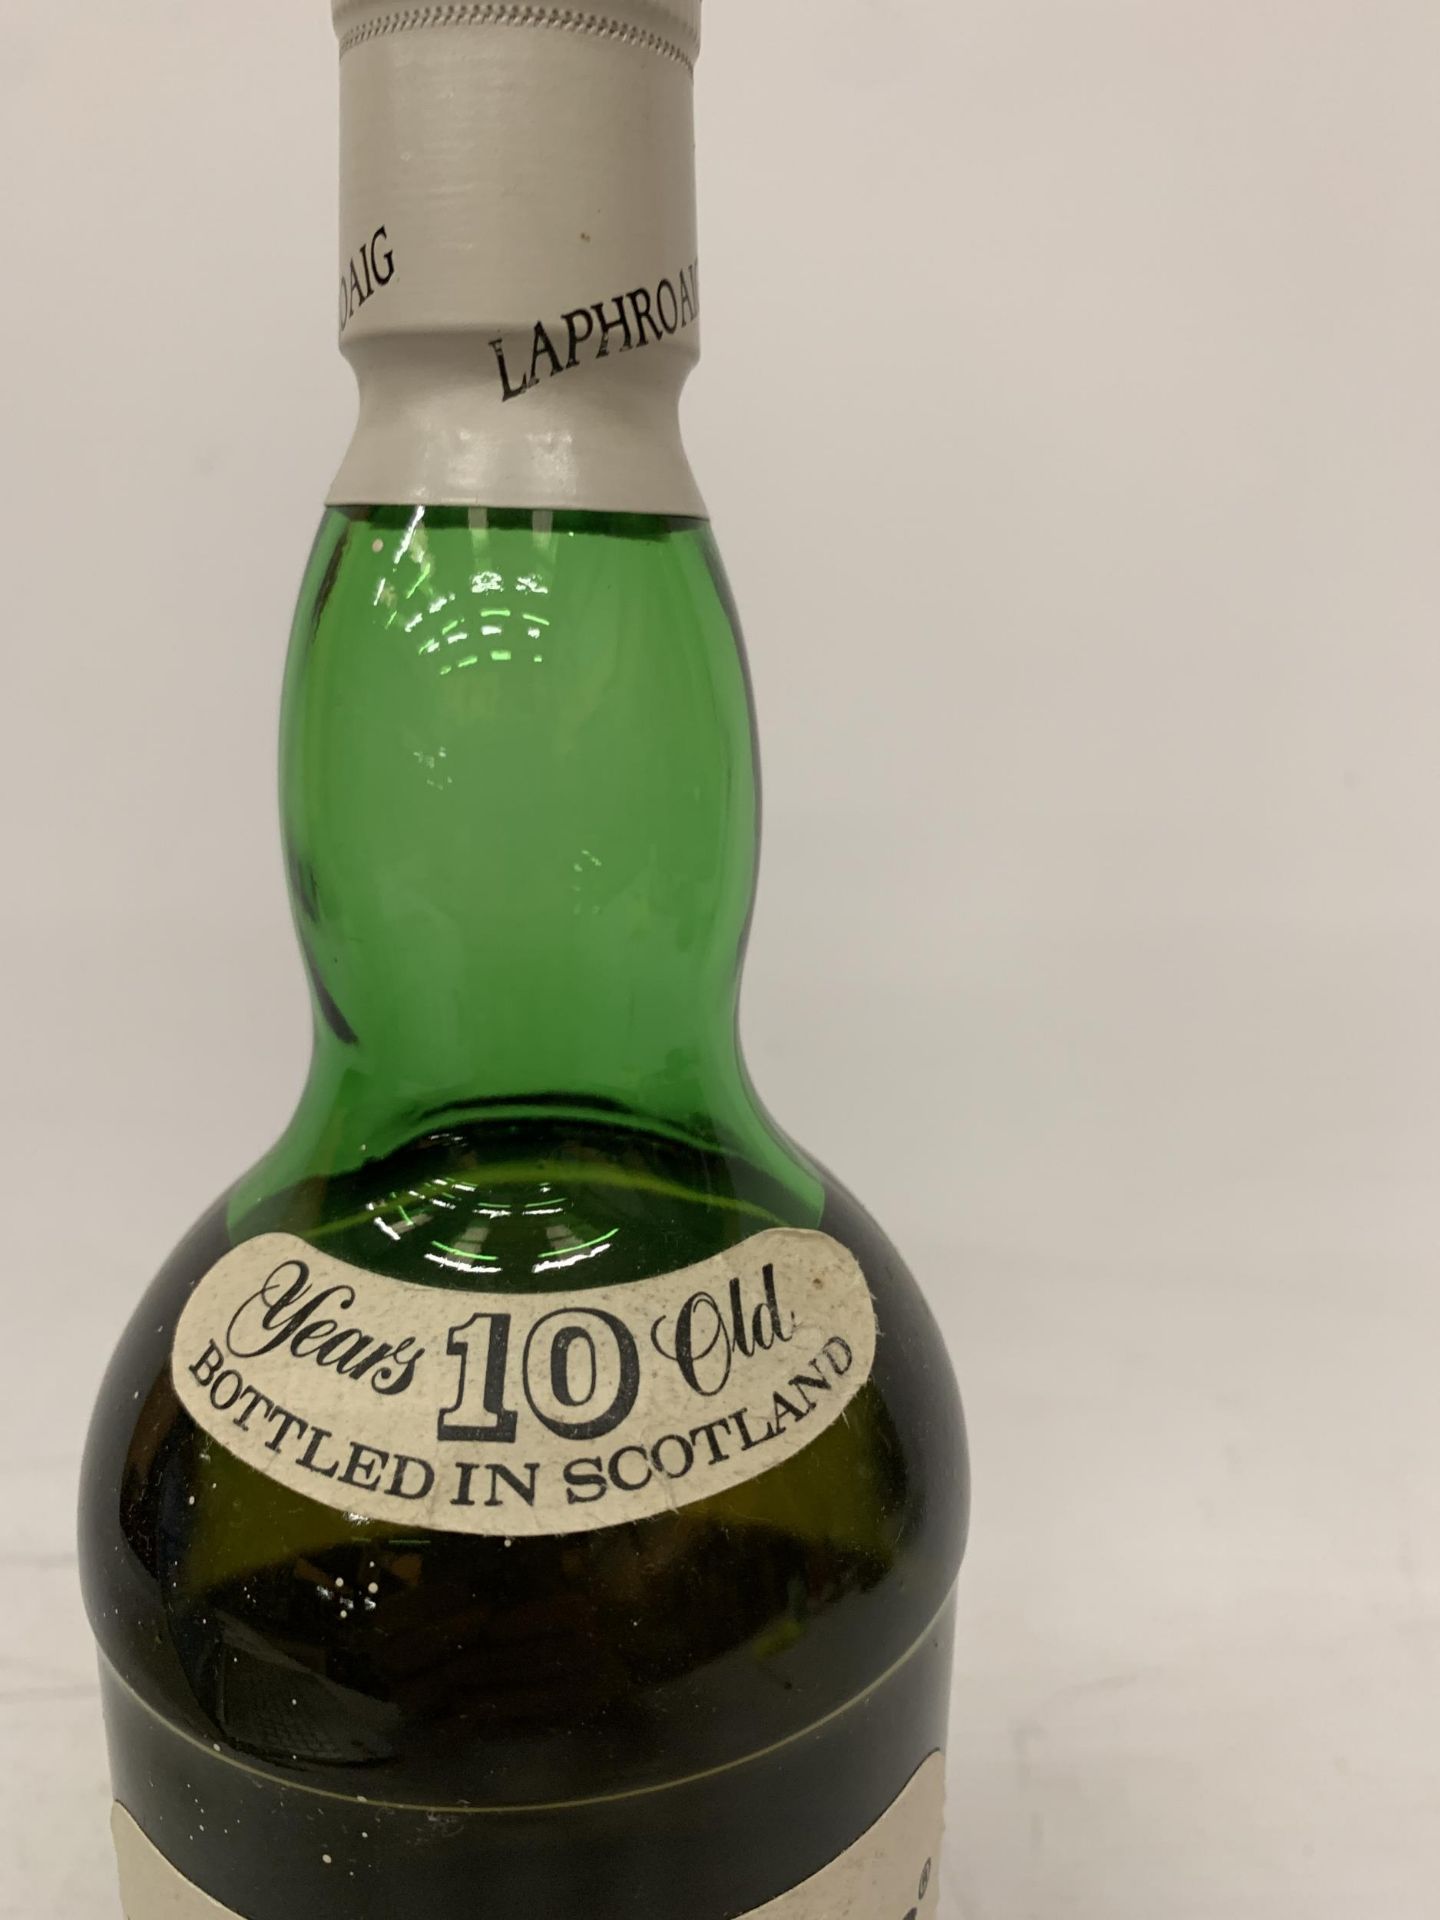 A 1L BOTTLE OF LAPHROAIG 10 YEARS OLD SINGLE ISLAY MALT SCOTCH WHISKY, OLD LABEL - Image 3 of 4